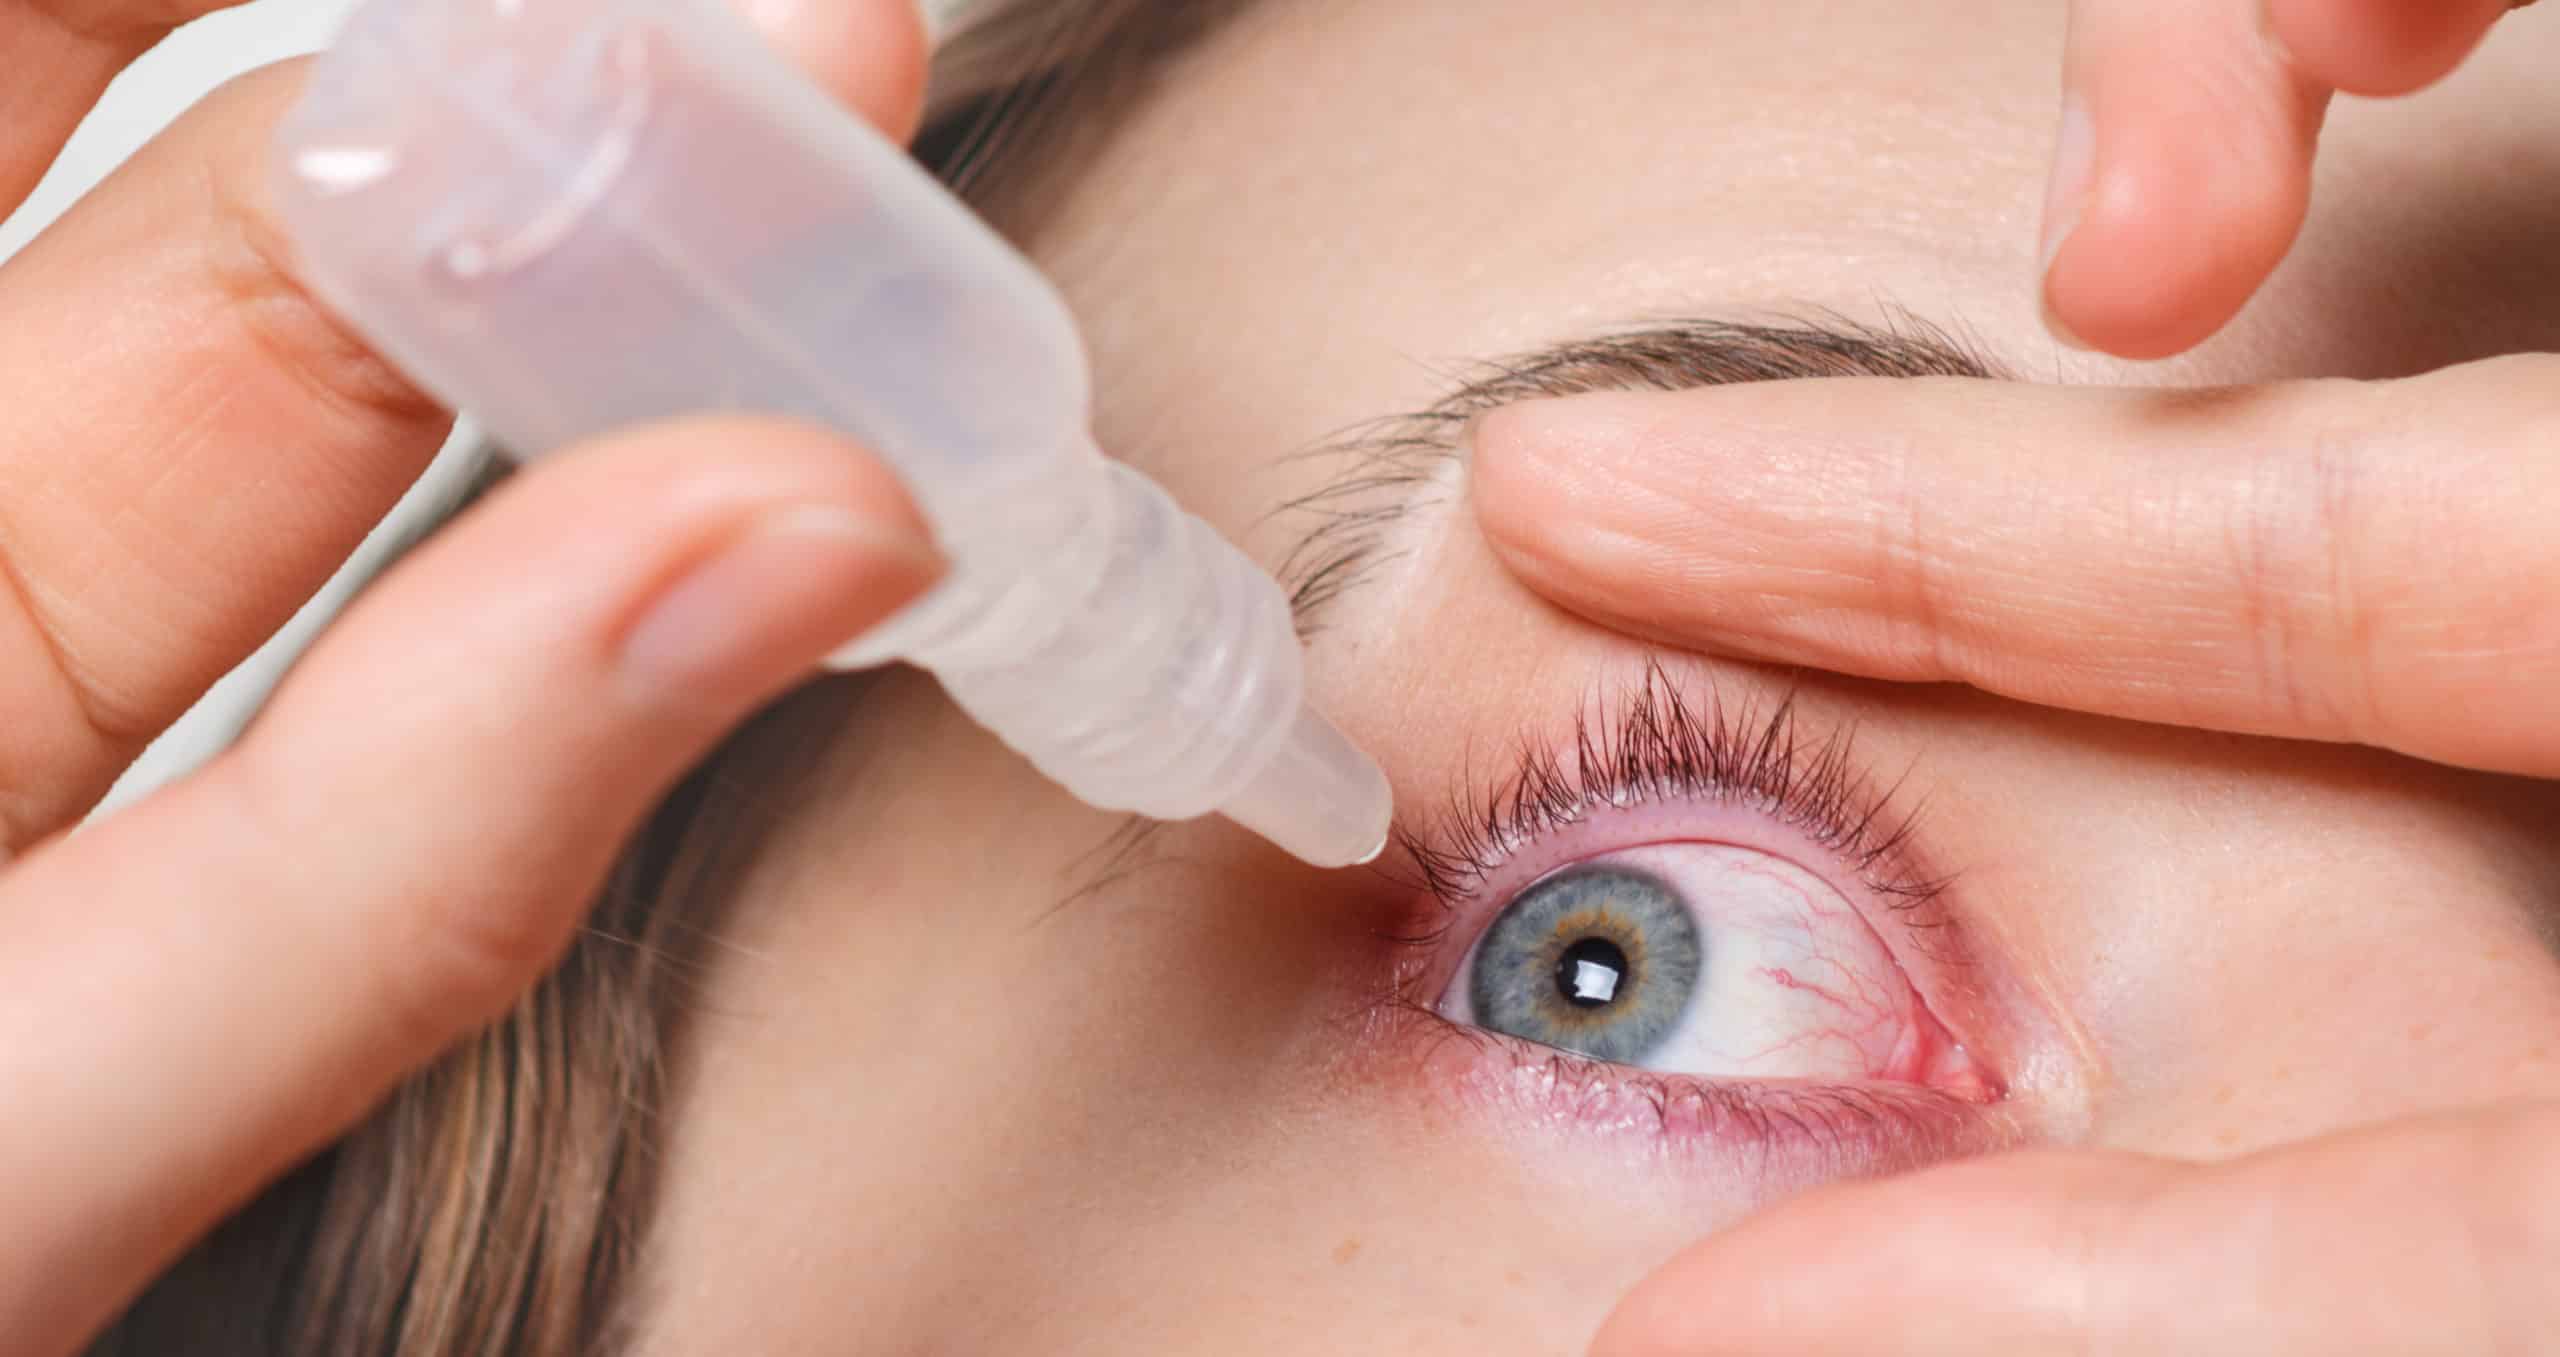 close-up-female-pours-drops-red-eye-has-conjuctivitis-glaucoma-bad-eyesight-pain-eyes-pain-treatment-concept-woman-cures-red-blood-eye-scaled